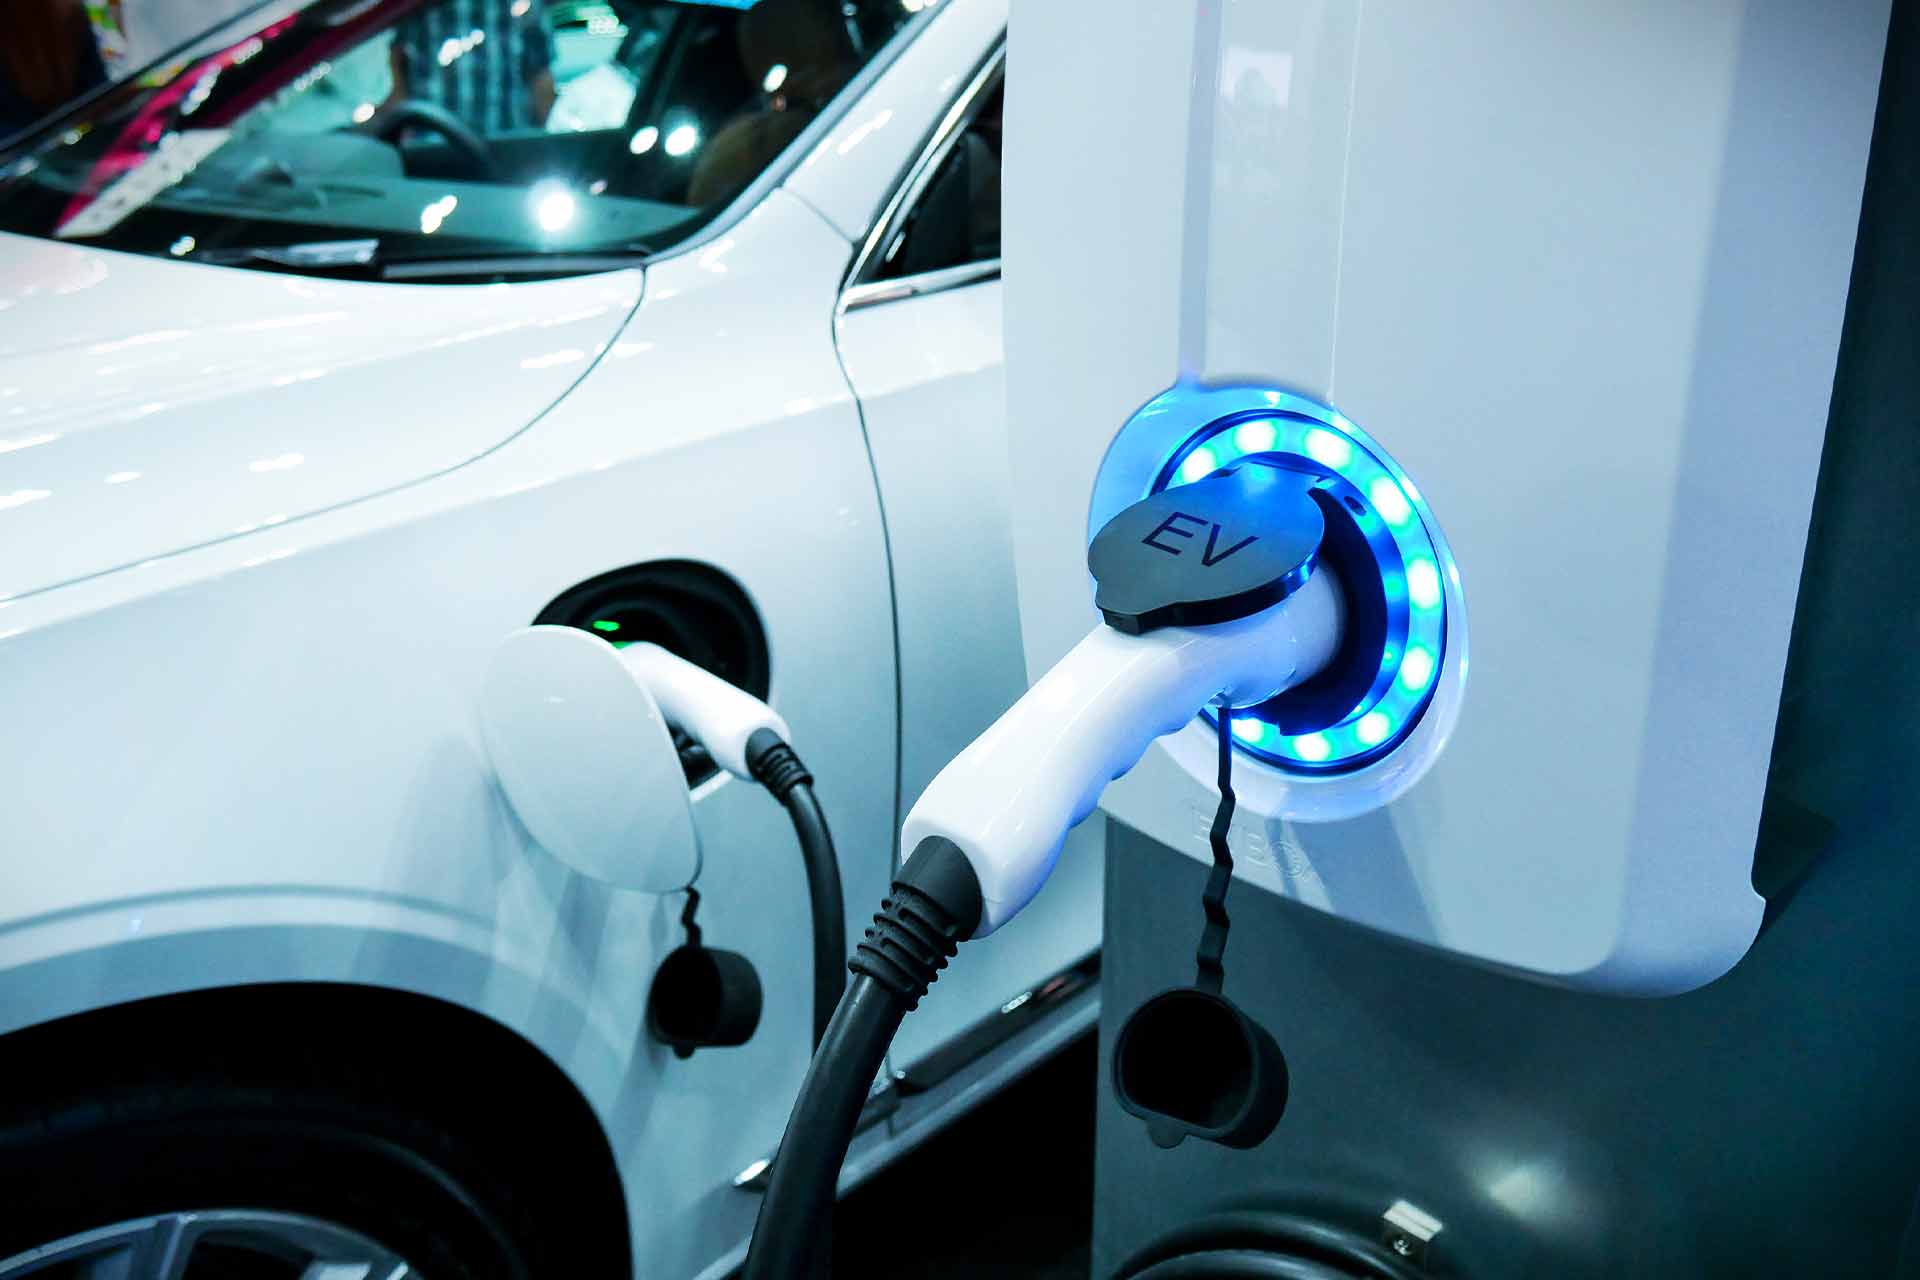 The best electric car charging stations for home charging or on trips